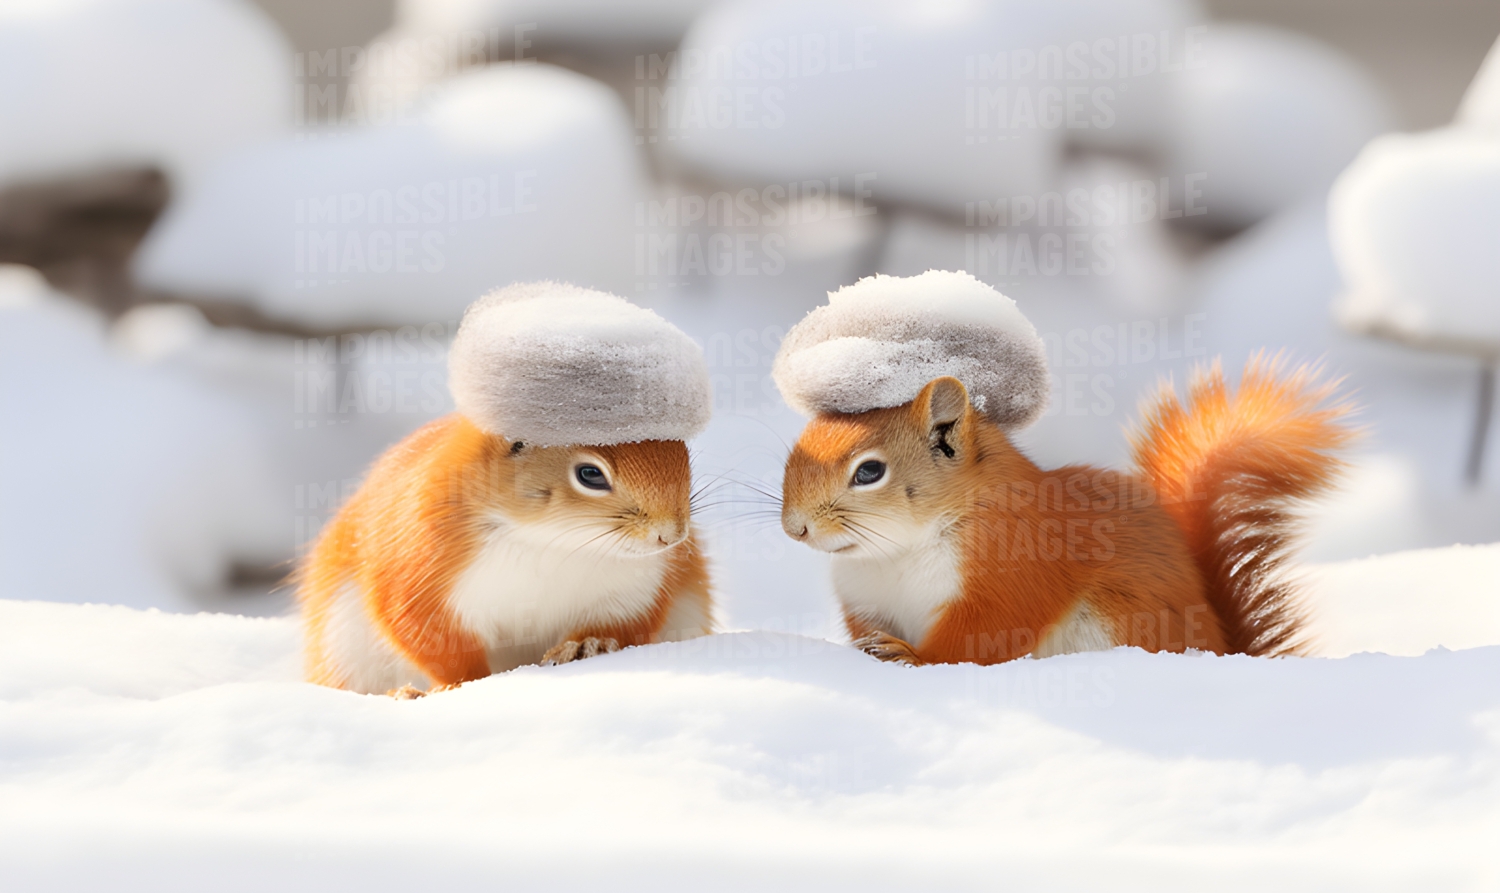 Red squirrels wearing hats in the snow -  Red squirrels wearing colourful hats, playing in the snow, their fluffy tails swishing behind them.